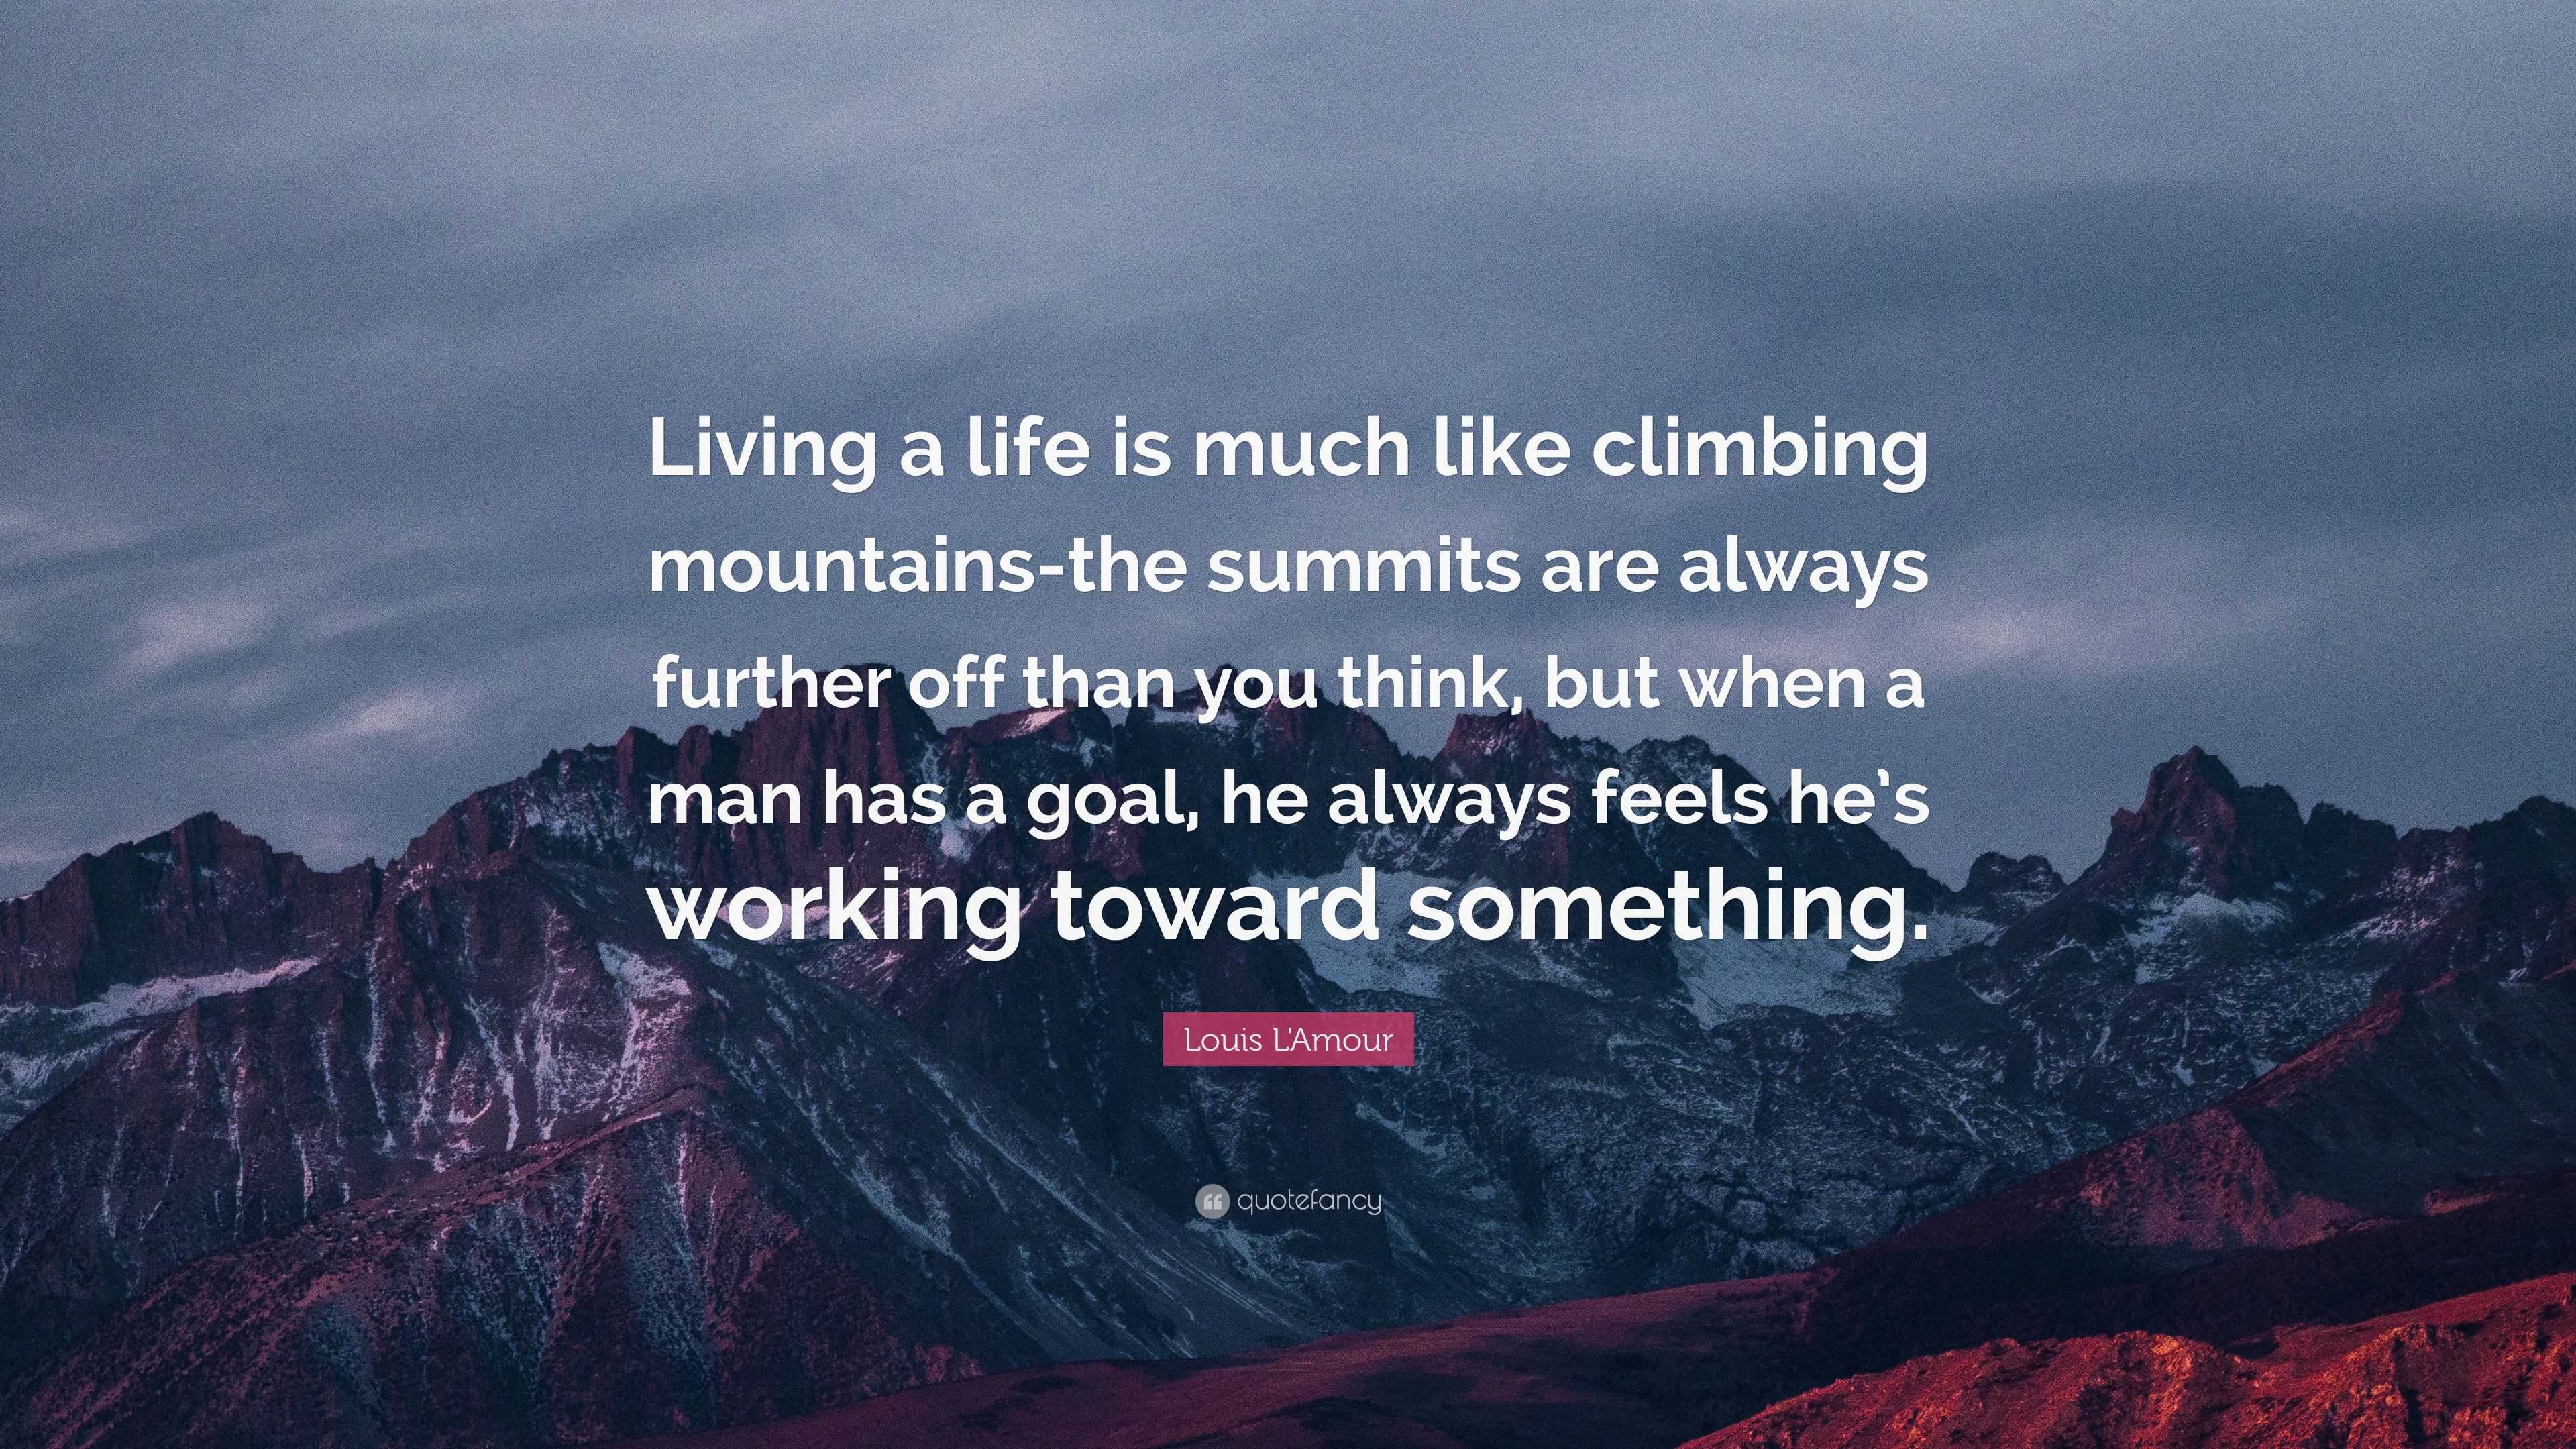 Louis L&#39;Amour Quote: “Living a life is much like climbing mountains-the summits are always ...